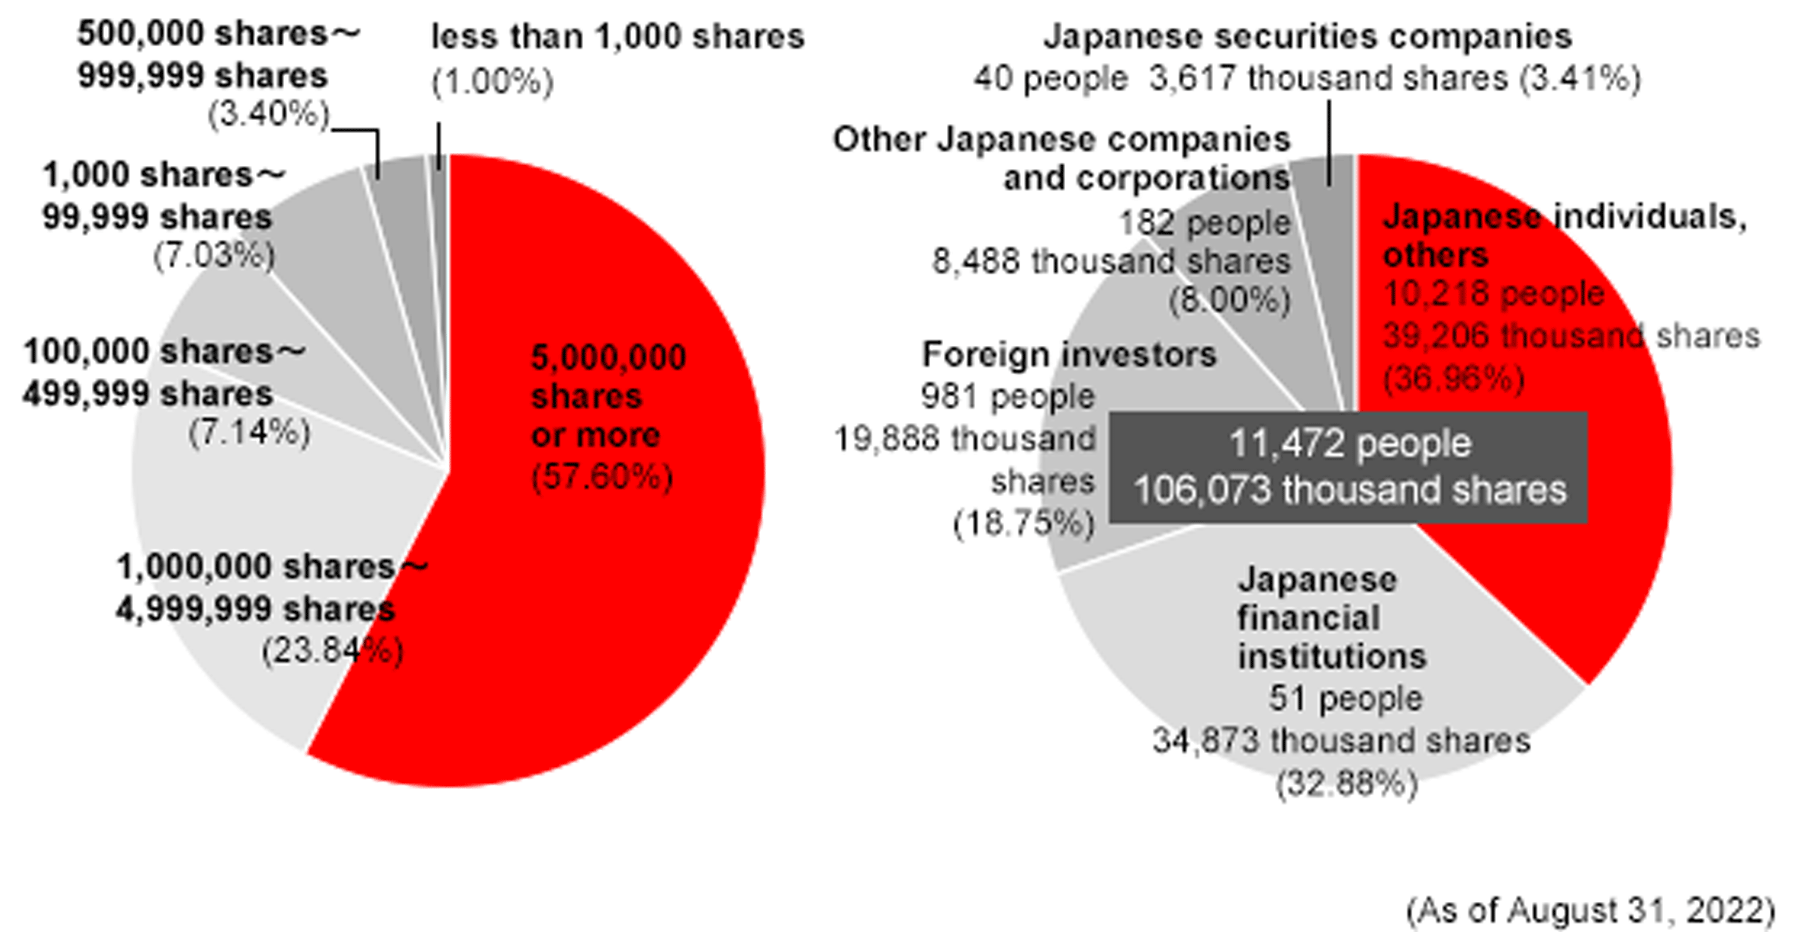 Breakdown of Shares by Type of Shareholder / Share Distribution by Size of Holding